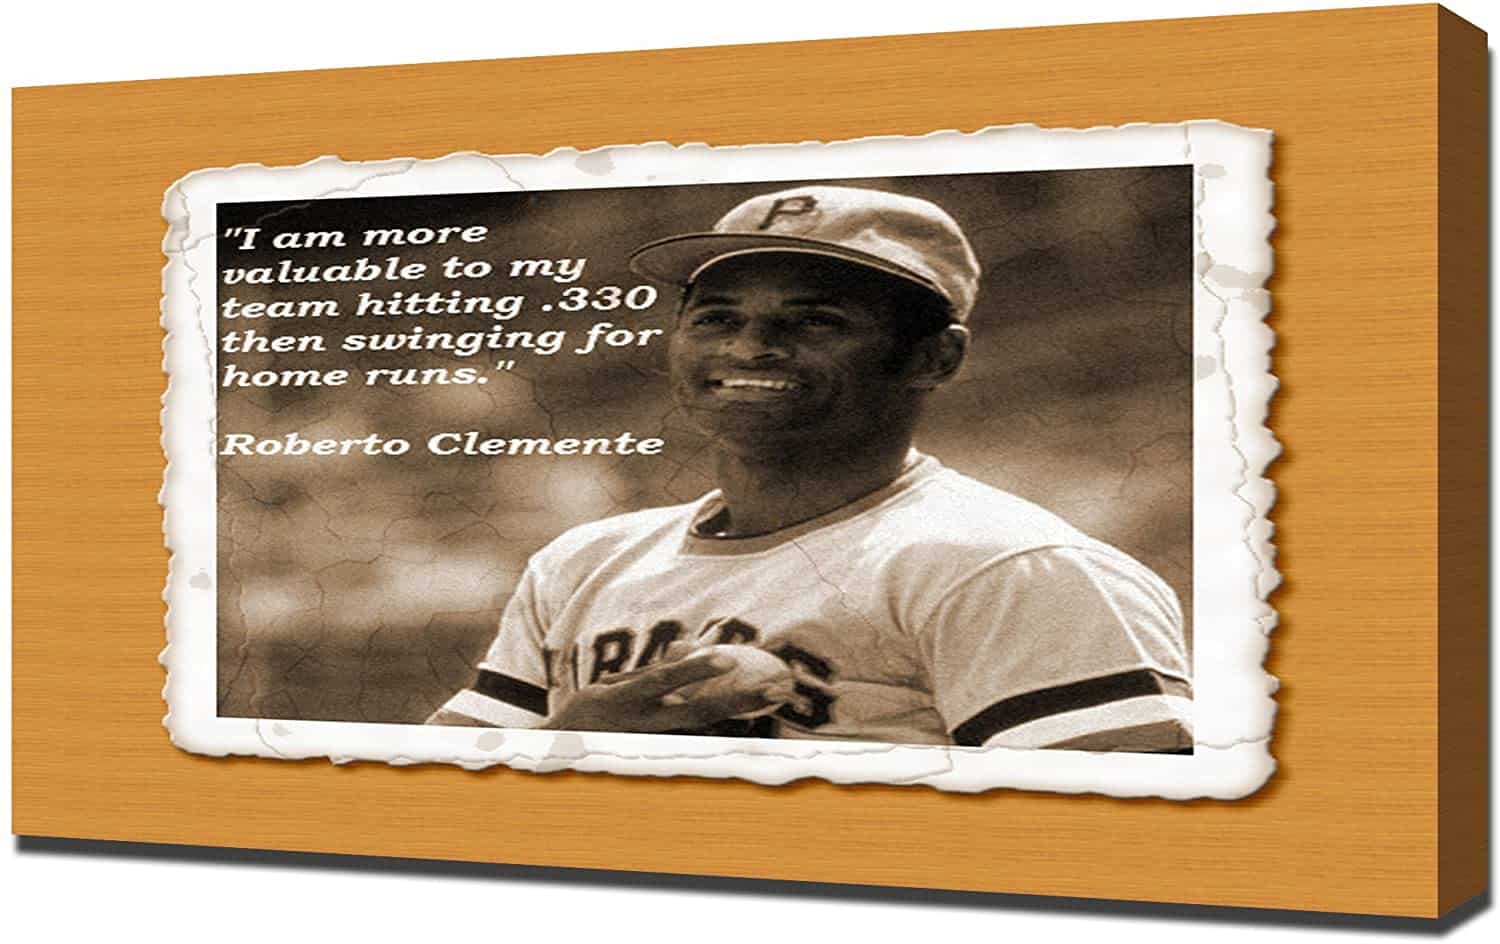 Roberto Clemente quote on contribution